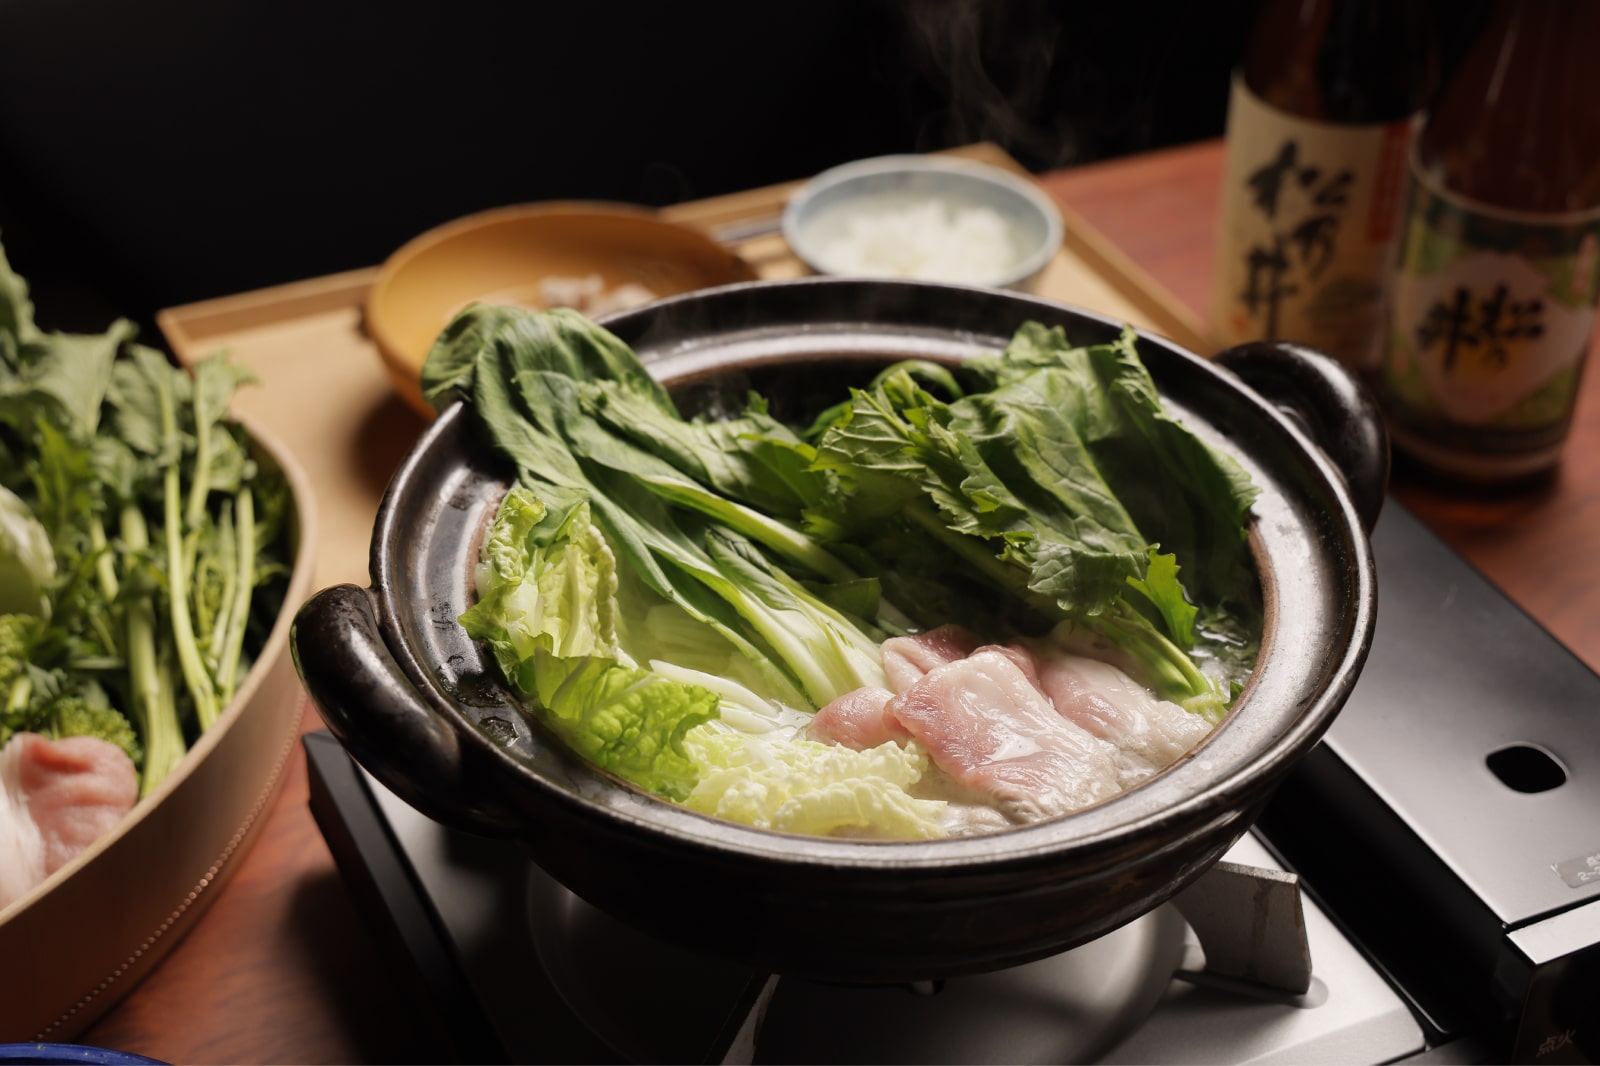 A special recipe hot pot plan is also available in winter.